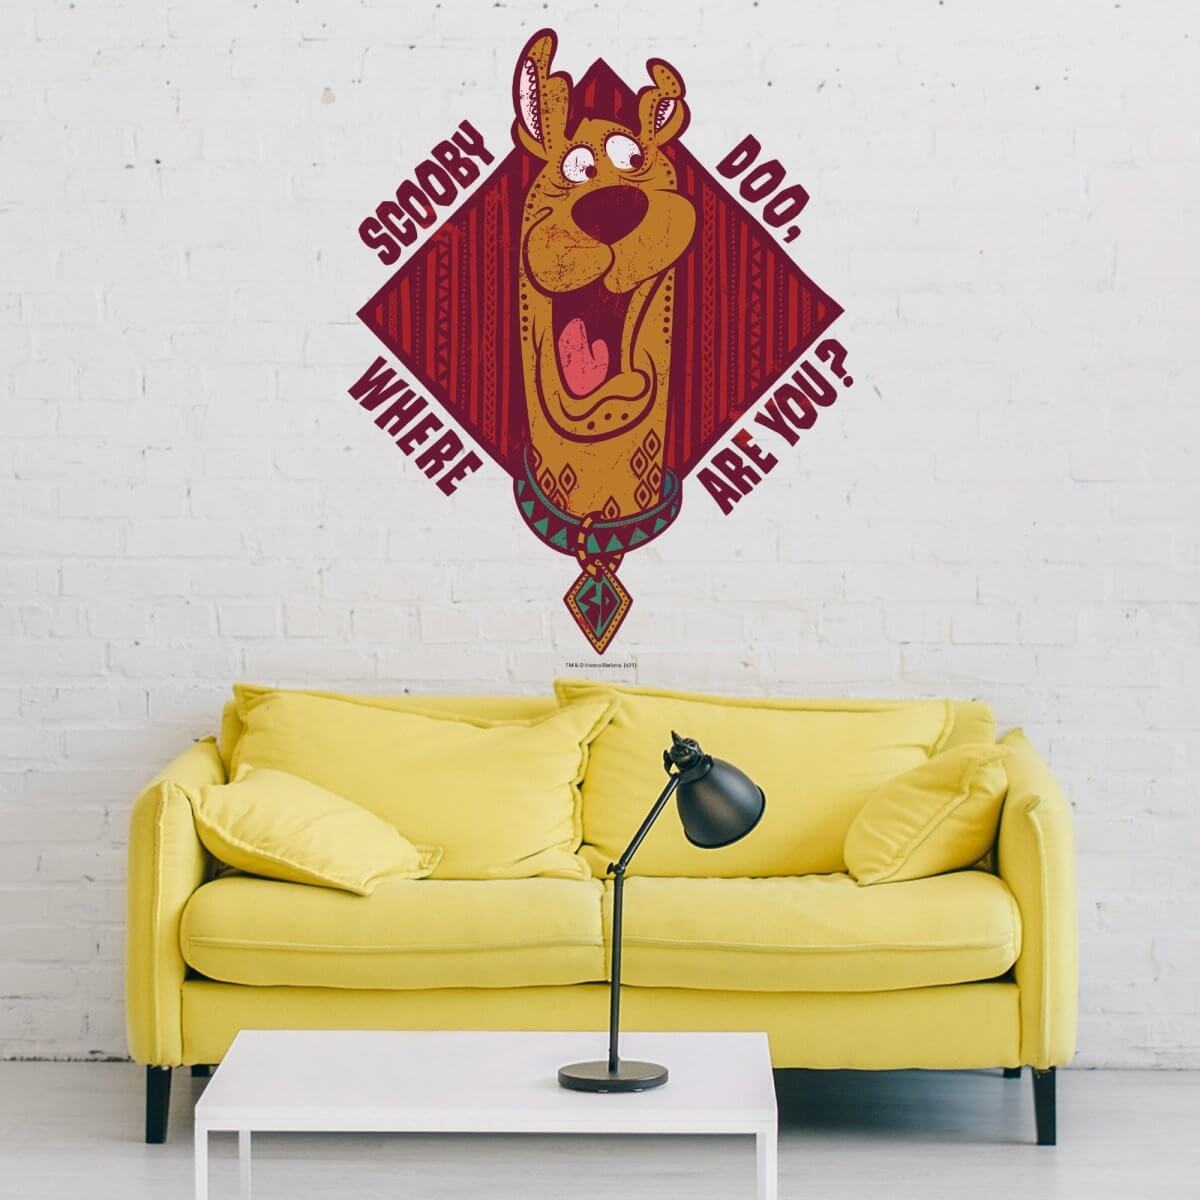 Kismet Decals Home & Room Decor Scooby-Doo Where Are You! Wall decal sticker - officially licensed - latex printed with no solvent odor - Kismet Decals